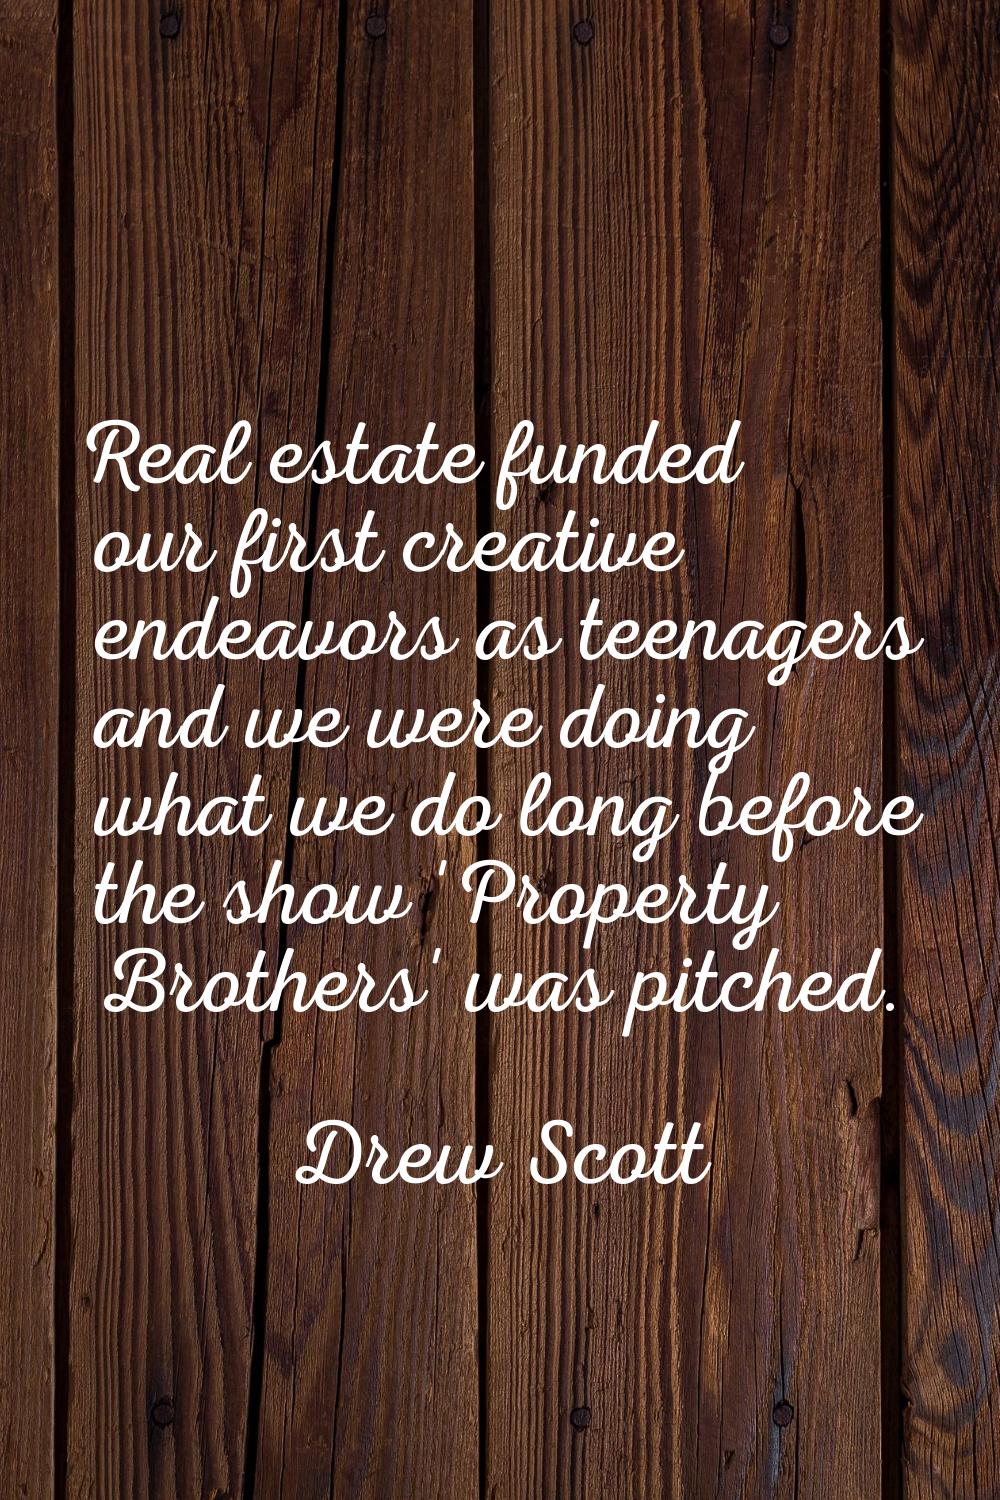 Real estate funded our first creative endeavors as teenagers and we were doing what we do long befo